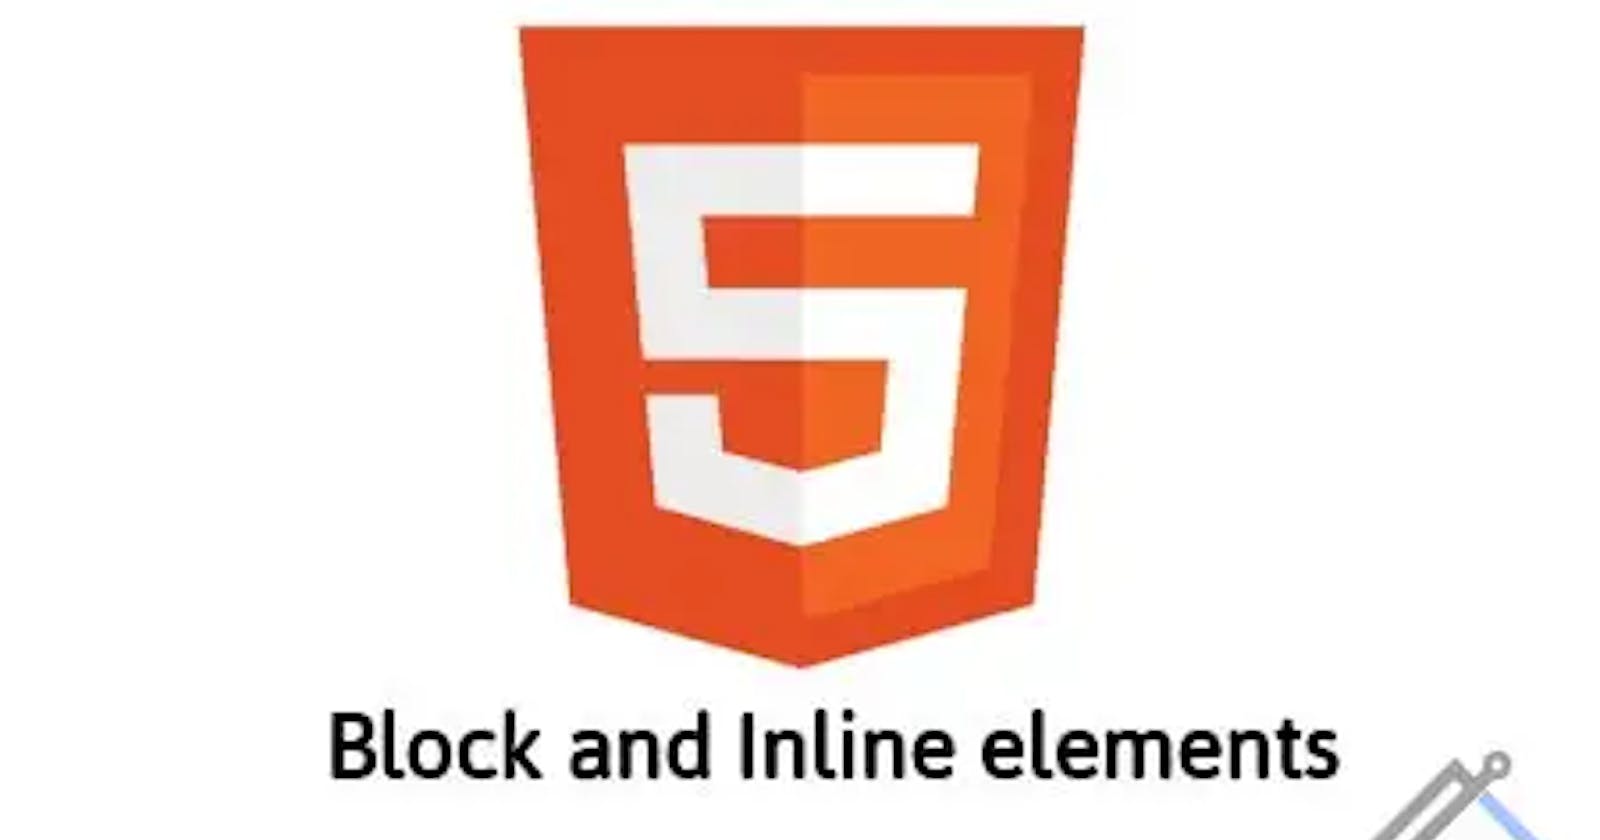 What are Inline and block elements in HTML? Difference between them? Name a few inline and block elements.